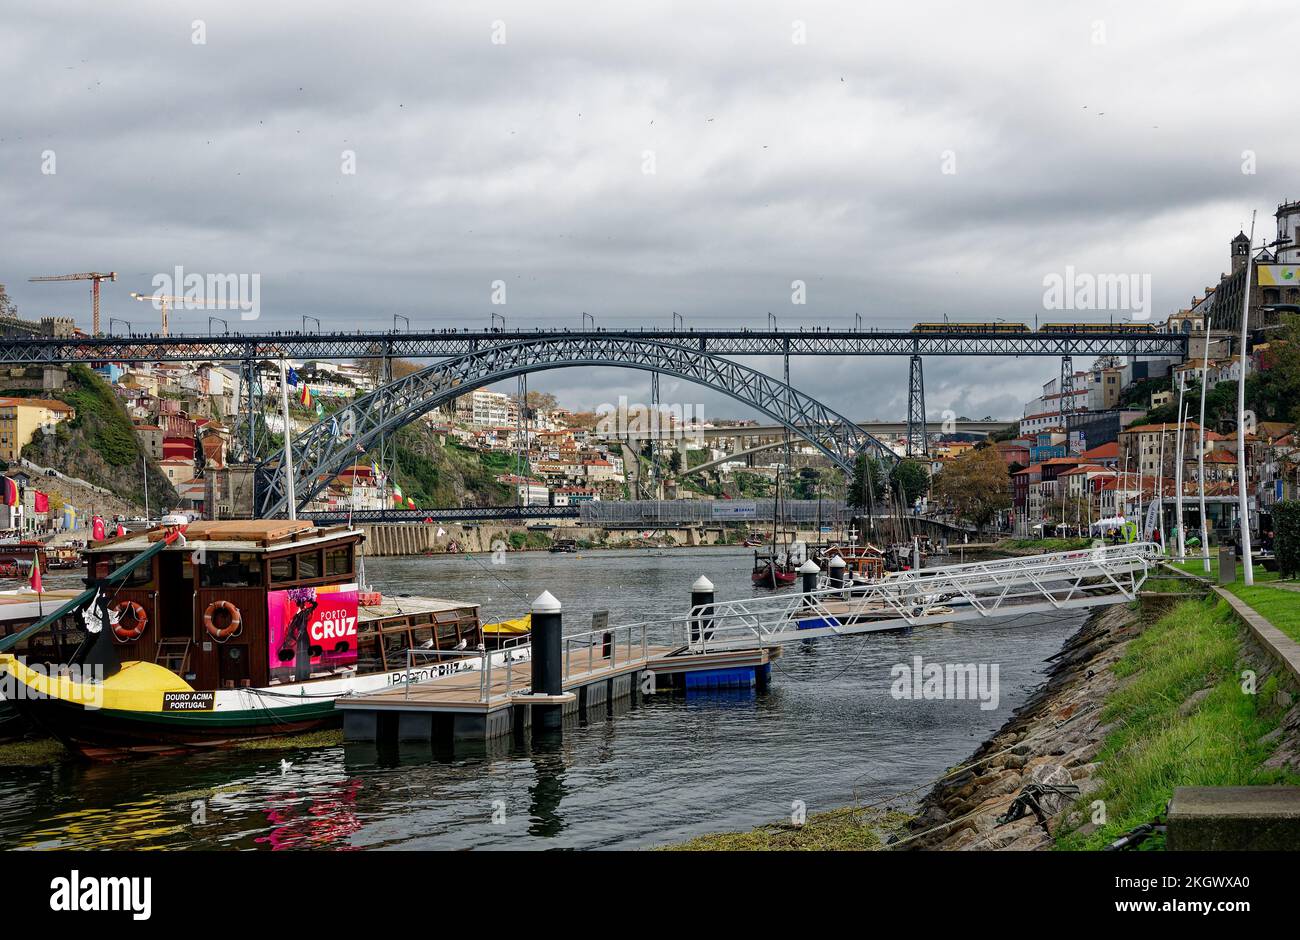 The Dom Luis Bridge designed by Gustavo Eiffel spanning the River Douro from Porto to Gaia, Portugal Stock Photo